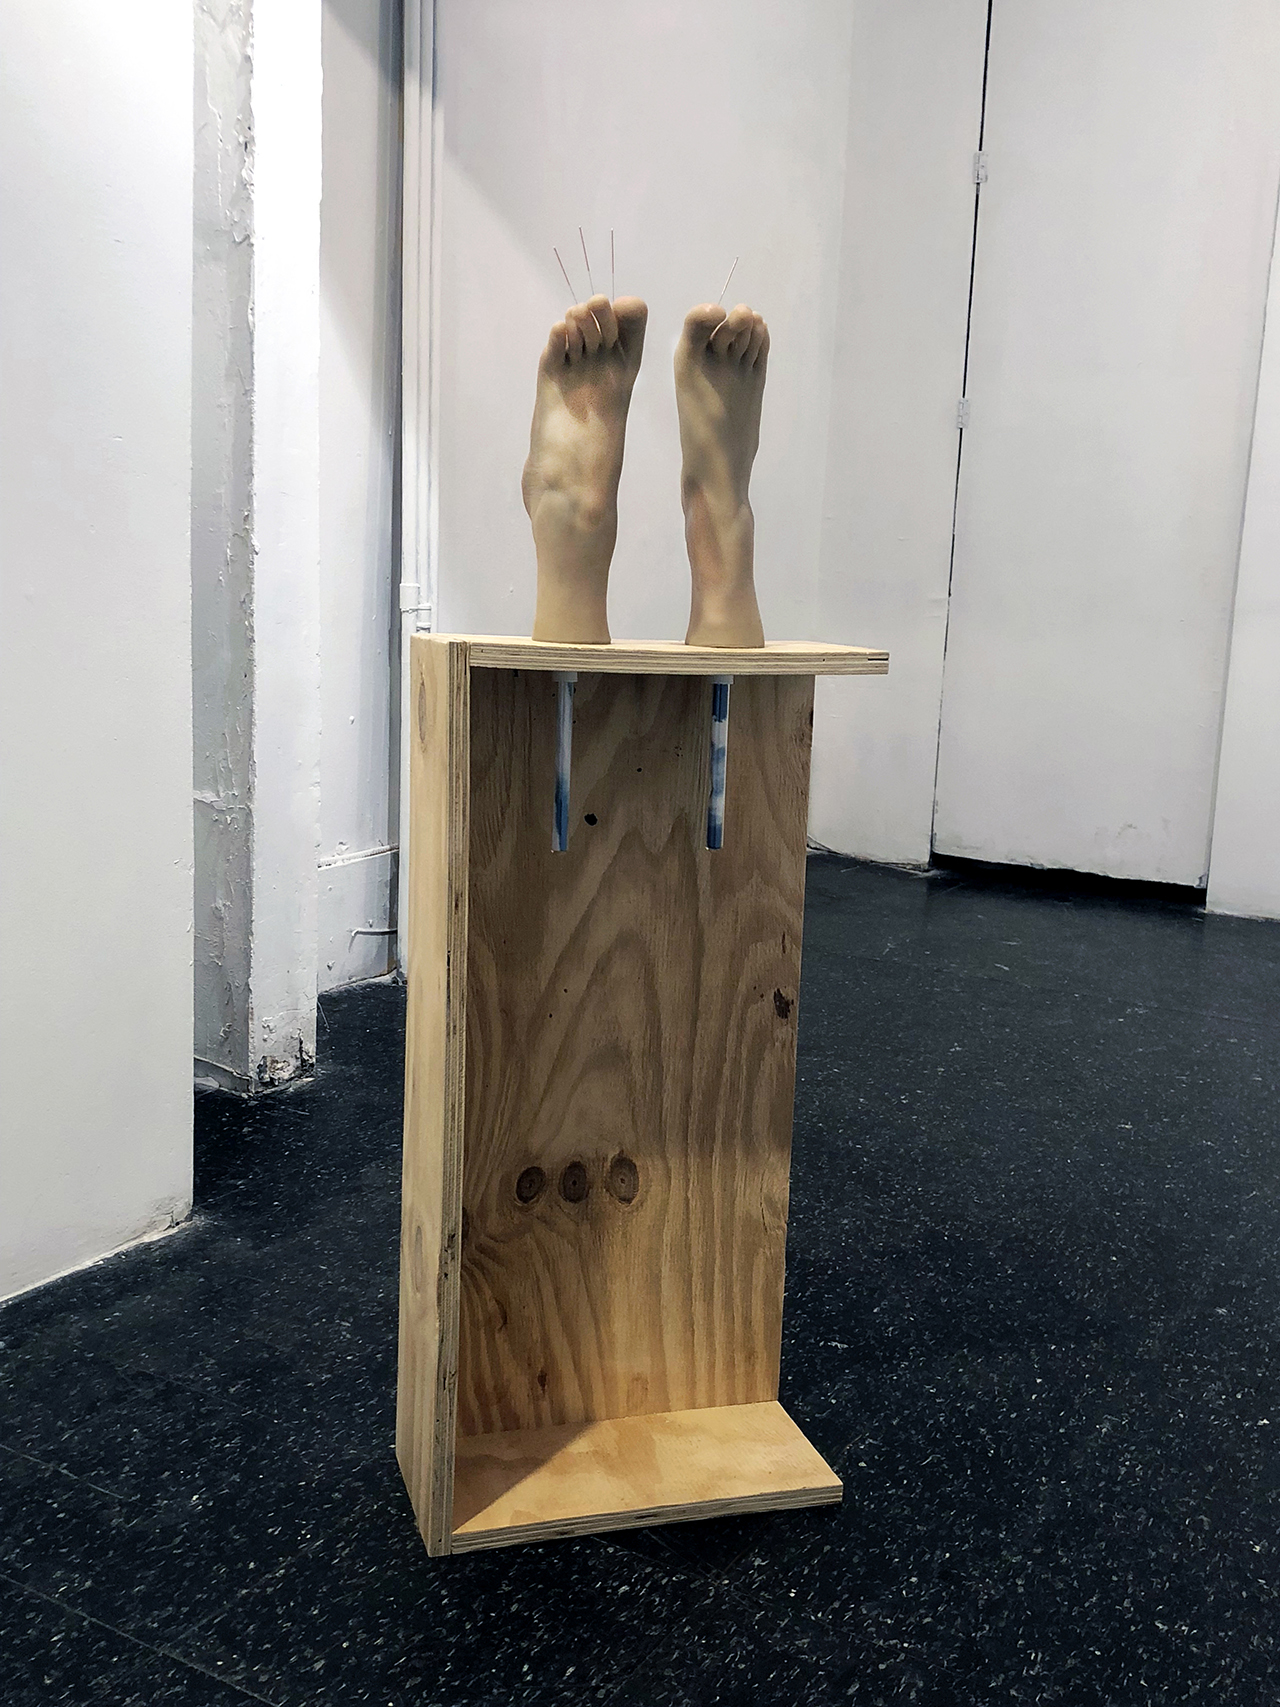 Maryam Jafri. Anxiety (2017). 12.5"x 6.75" x 40.5". wood, silicone feet, acupuncture needles, test tubes, paper